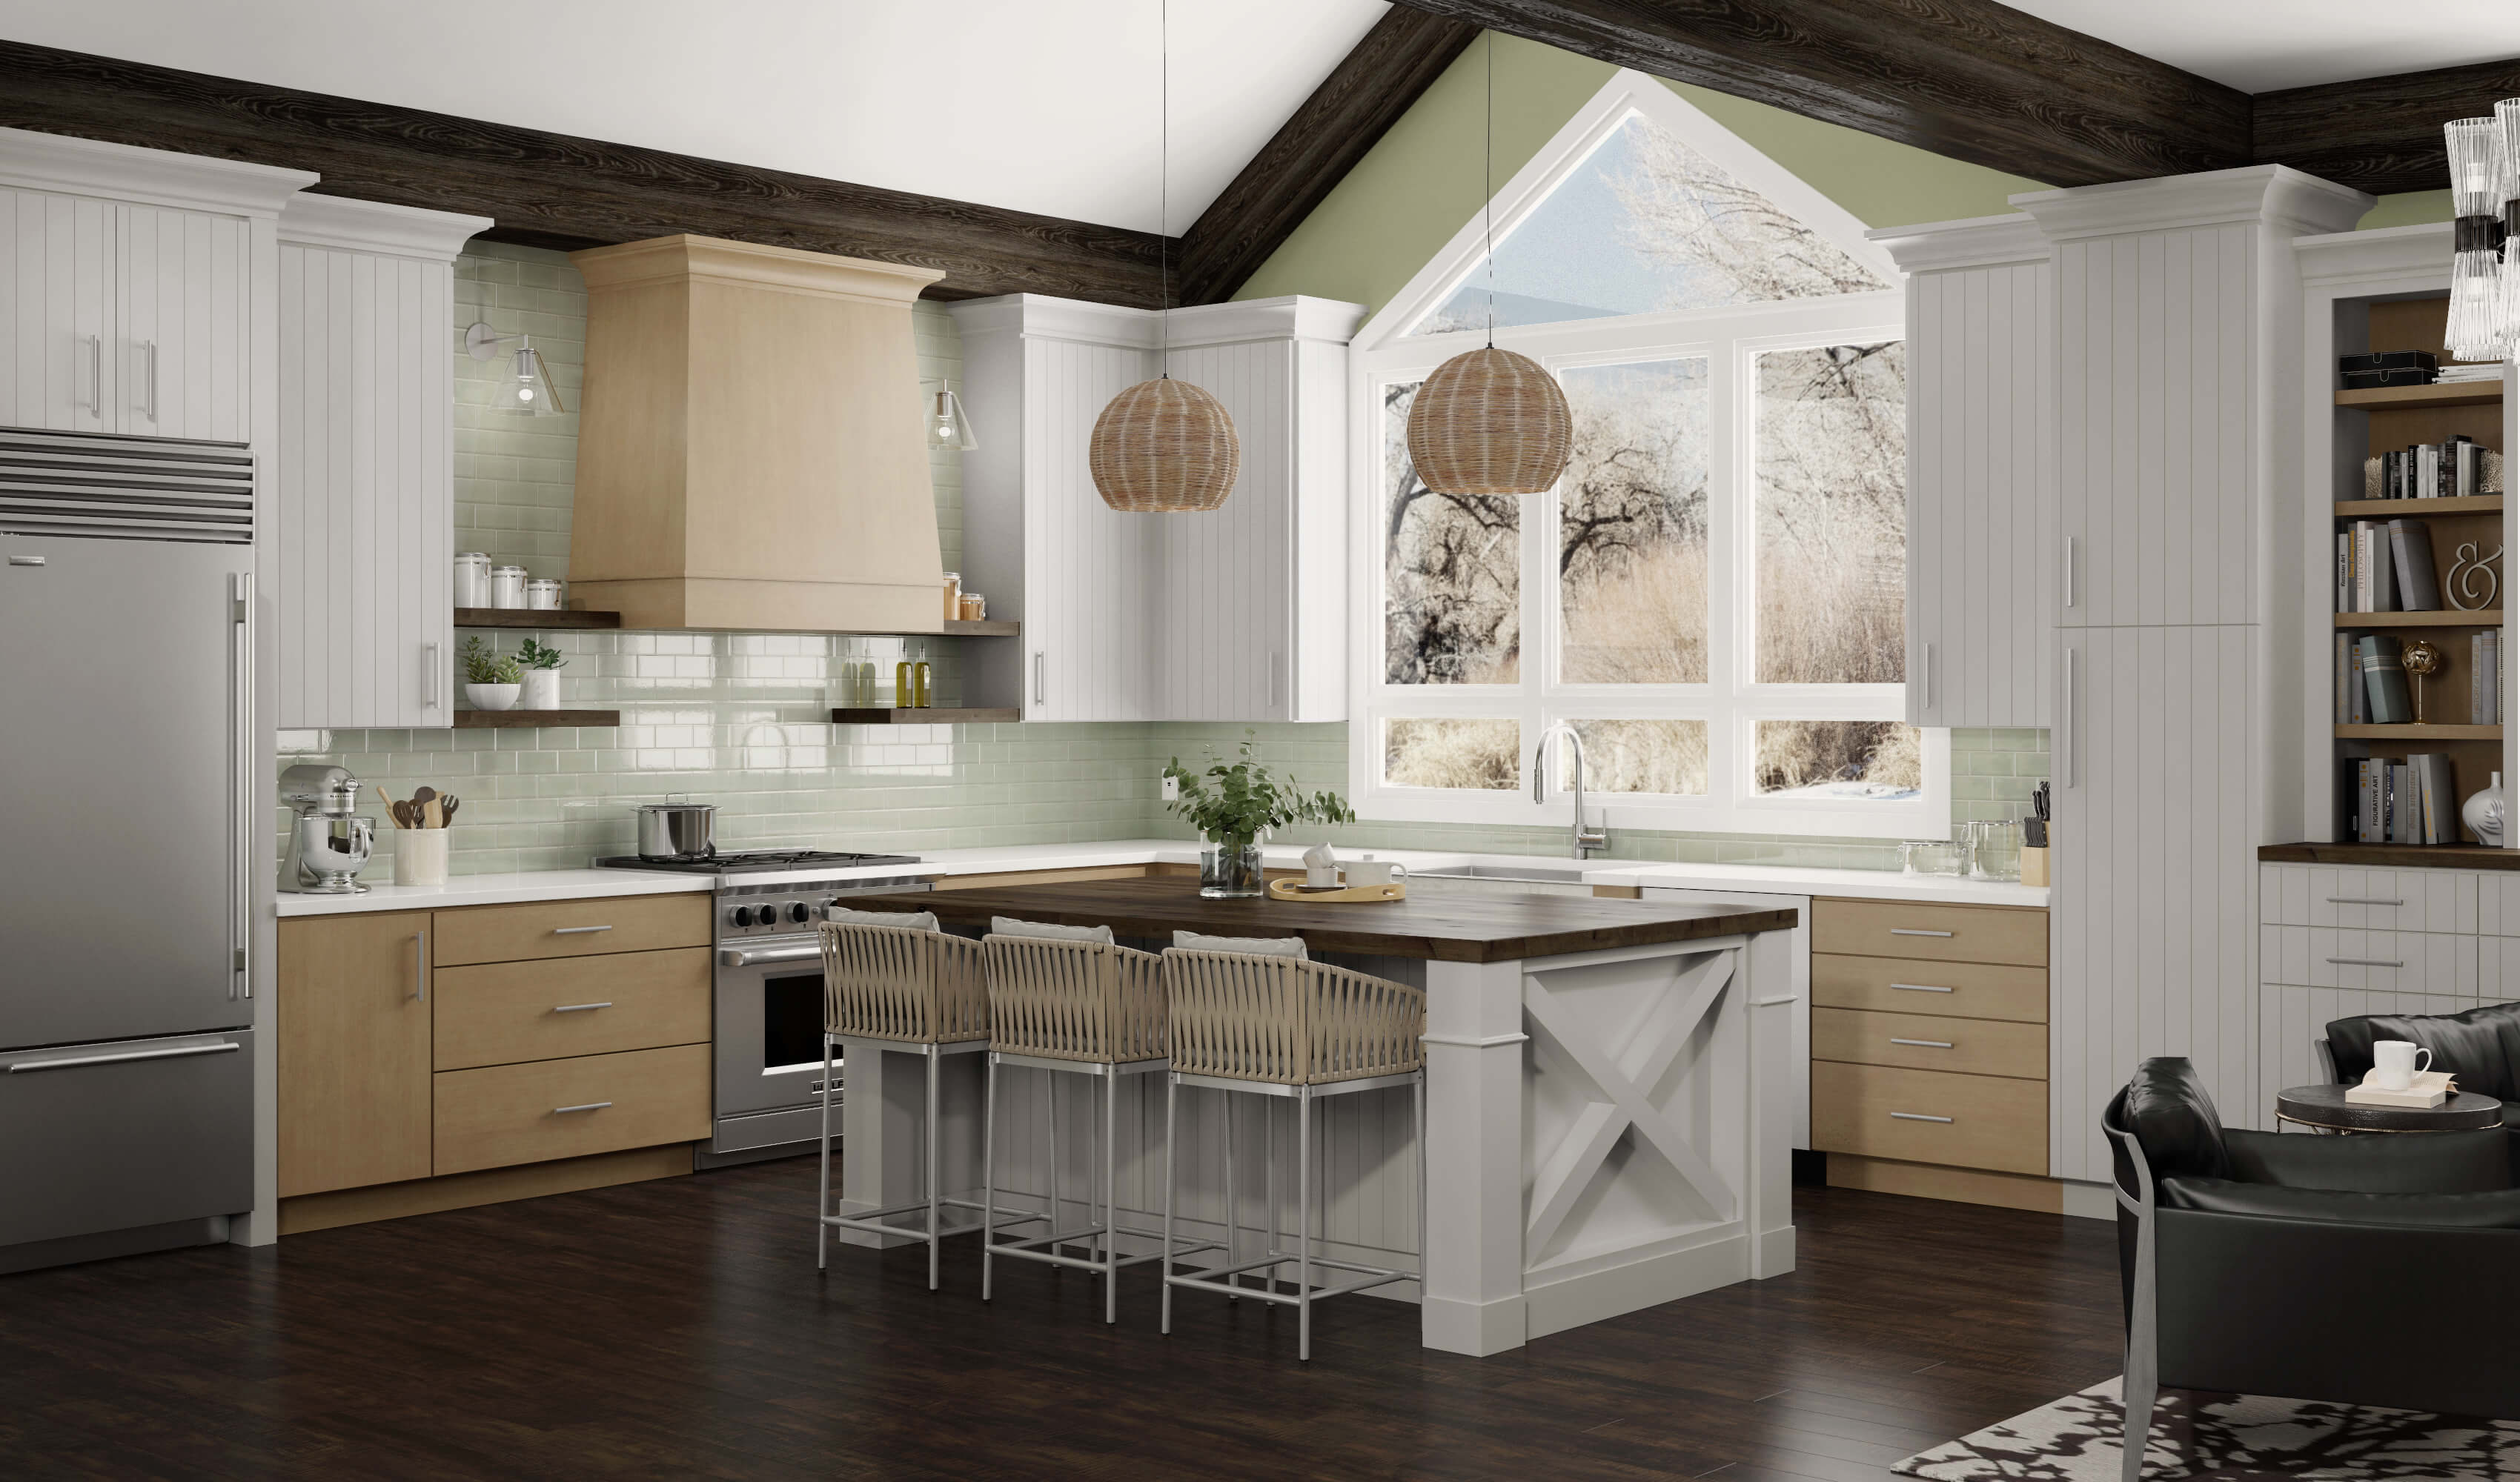 This new home features a scani style look using a shiplap slab door style in an off-white, light gray painted finish contrasted by ligth stained maple wood cabinets and modern wood hood. The kitchen island has seating for three, a wood countertop, and a grand x patterned end cap with decorative columns for posts.